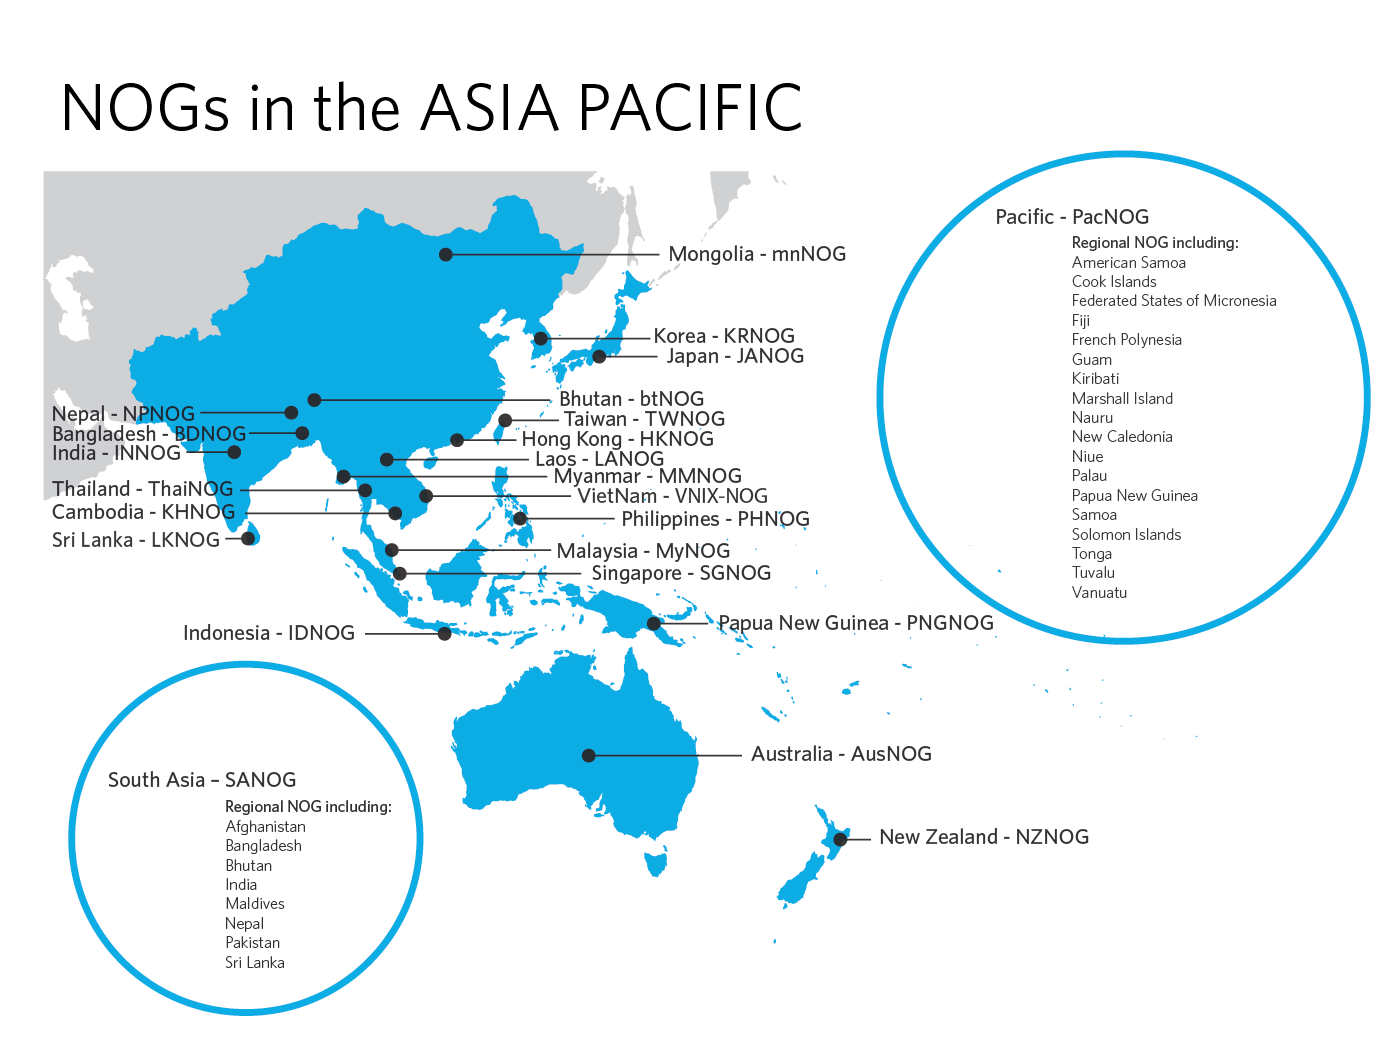 NOGs in the Asia Pacific